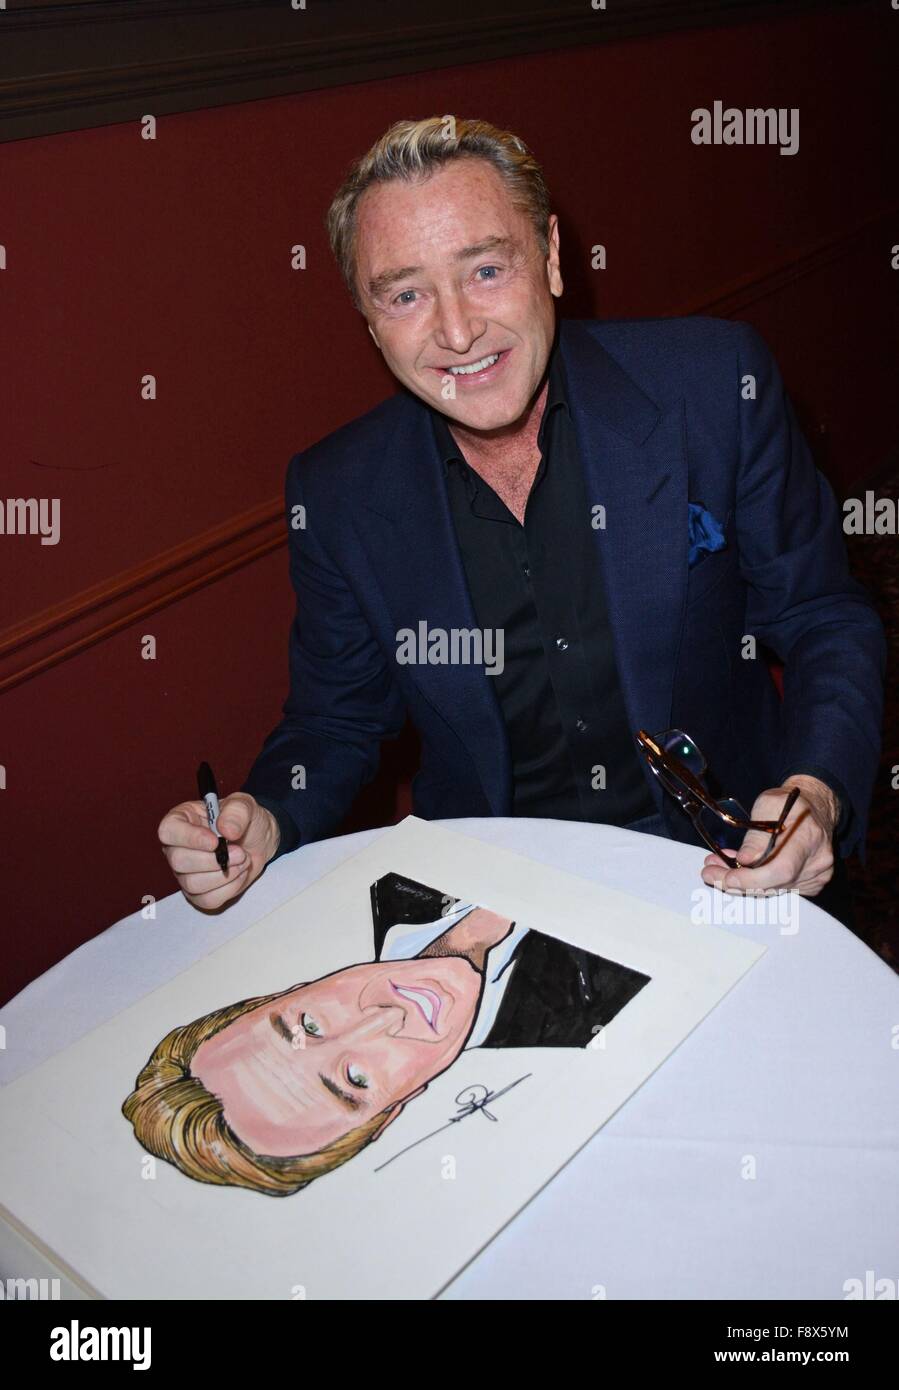 New York, NY, USA. 11th Dec, 2015. Michael Flatley at a public appearance for Lord of the Dance Michael Flatley Gets Caricature Portrait at Sardi's, Sardi's Restaurant, New York, NY December 11, 2015. Credit:  Derek Storm/Everett Collection/Alamy Live News Stock Photo